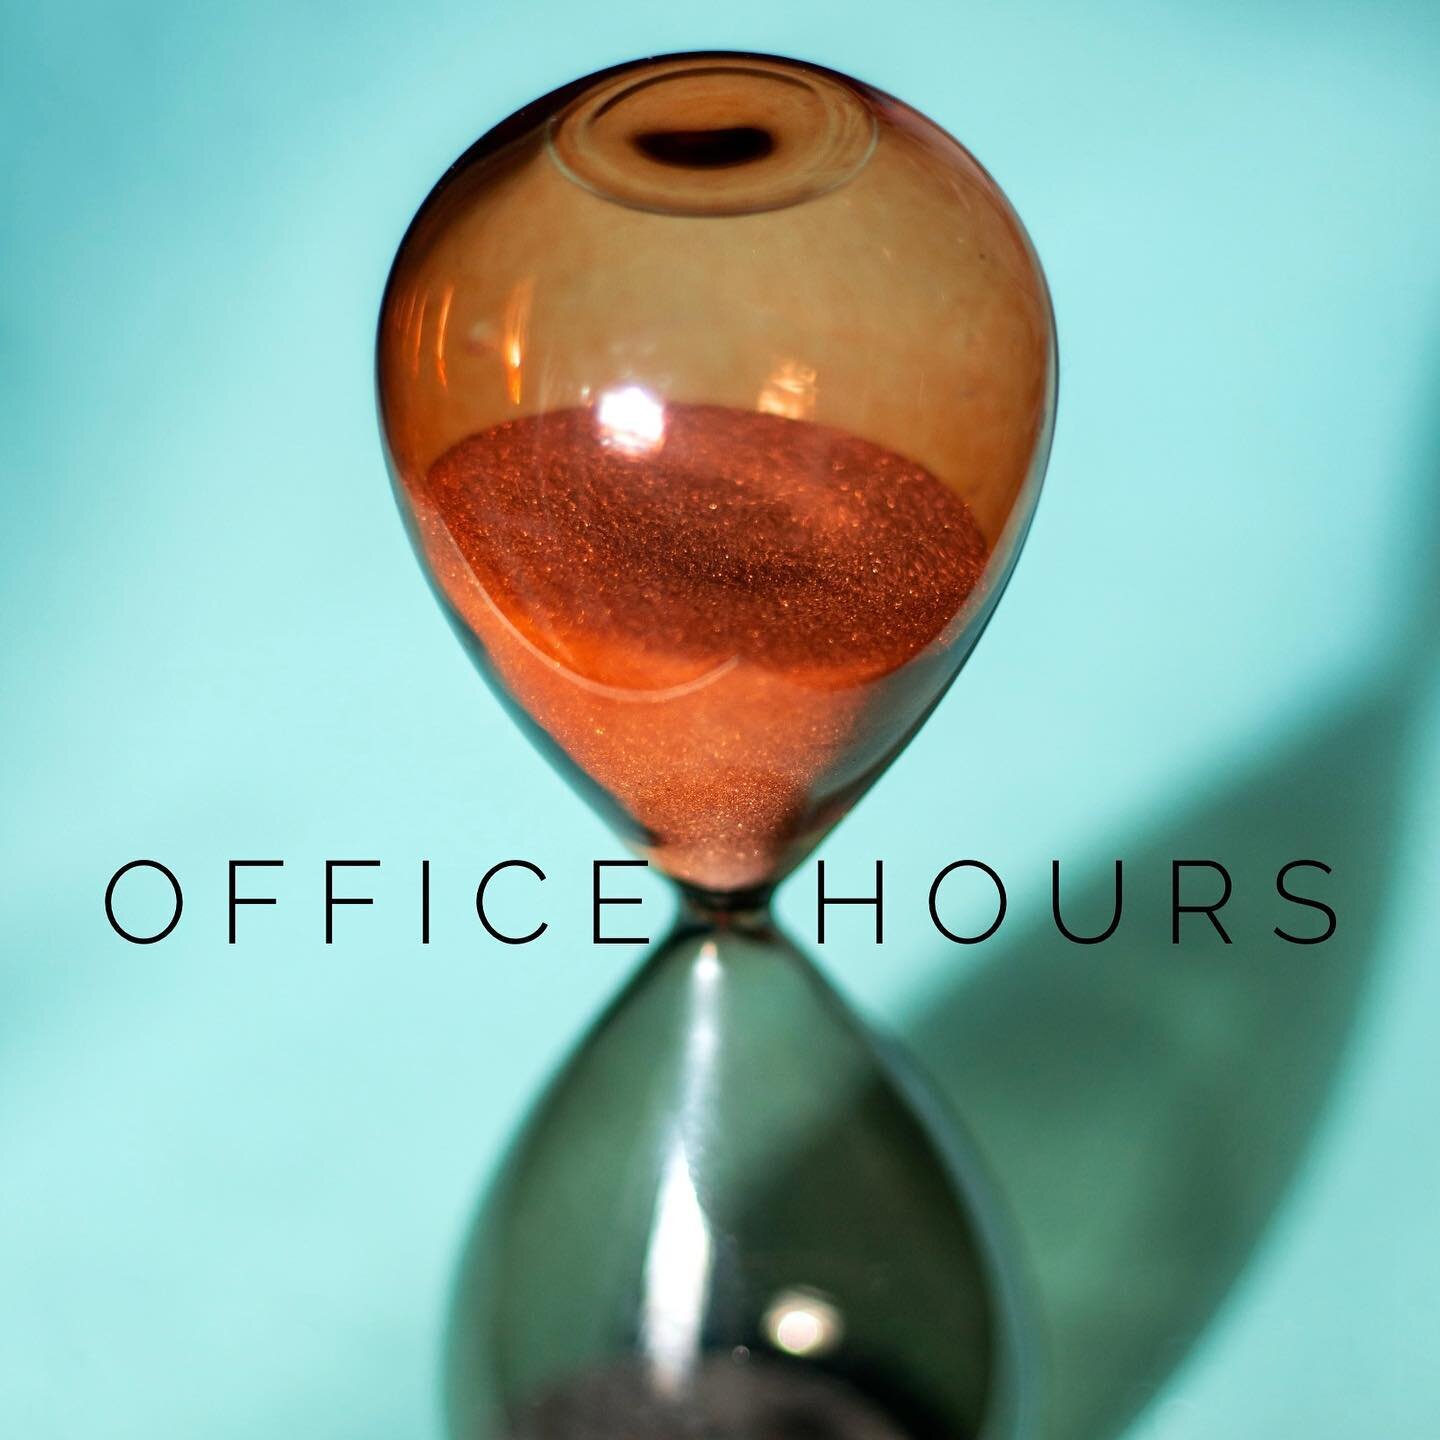 Tax House Miami is shifting into off-season office hours starting May 1st.

Miami Location |

Monday : Closed 
Tuesday : 10am - 7pm
Wednesday : 10am - 7pm
Thursday : 10am - 7pm
Friday : Closed
Saturday: Closed 
Sunday : Closed

You can schedule an ap